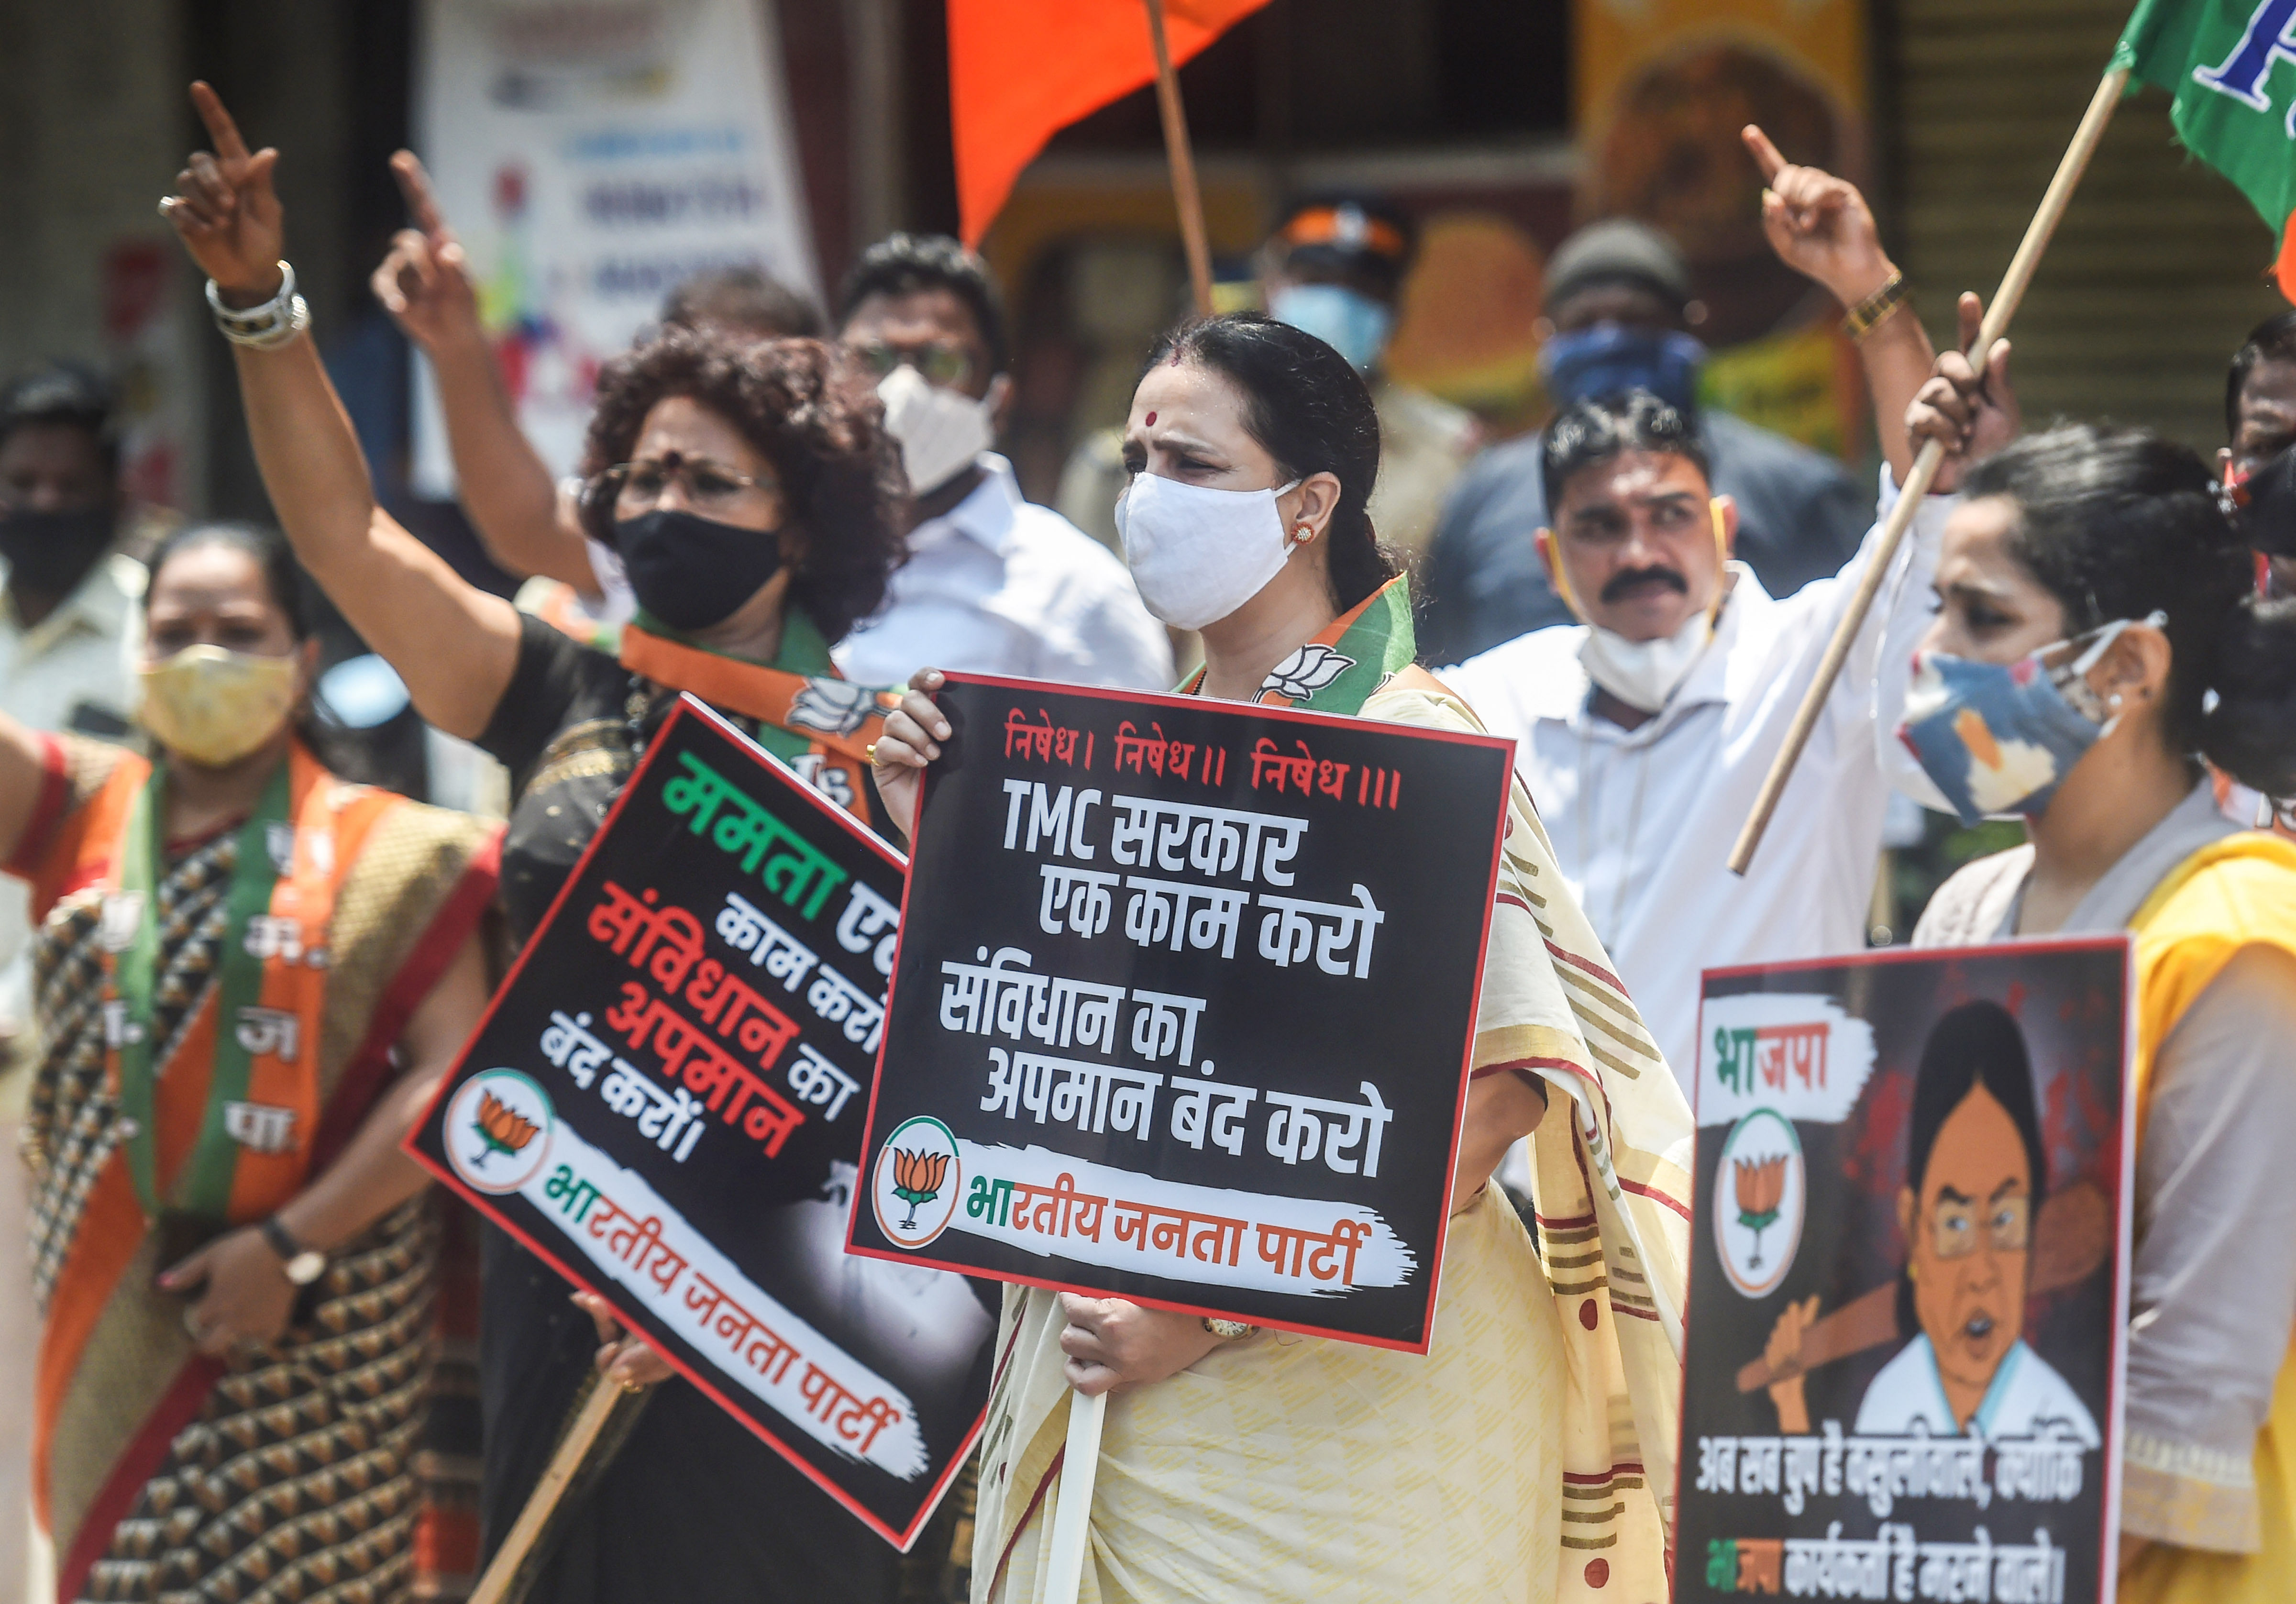 BJP leader Chitra Wagh along with party workers takes part in a protest against alleged attack on the party workers in West Bengal. Credit: PTI/ Representative